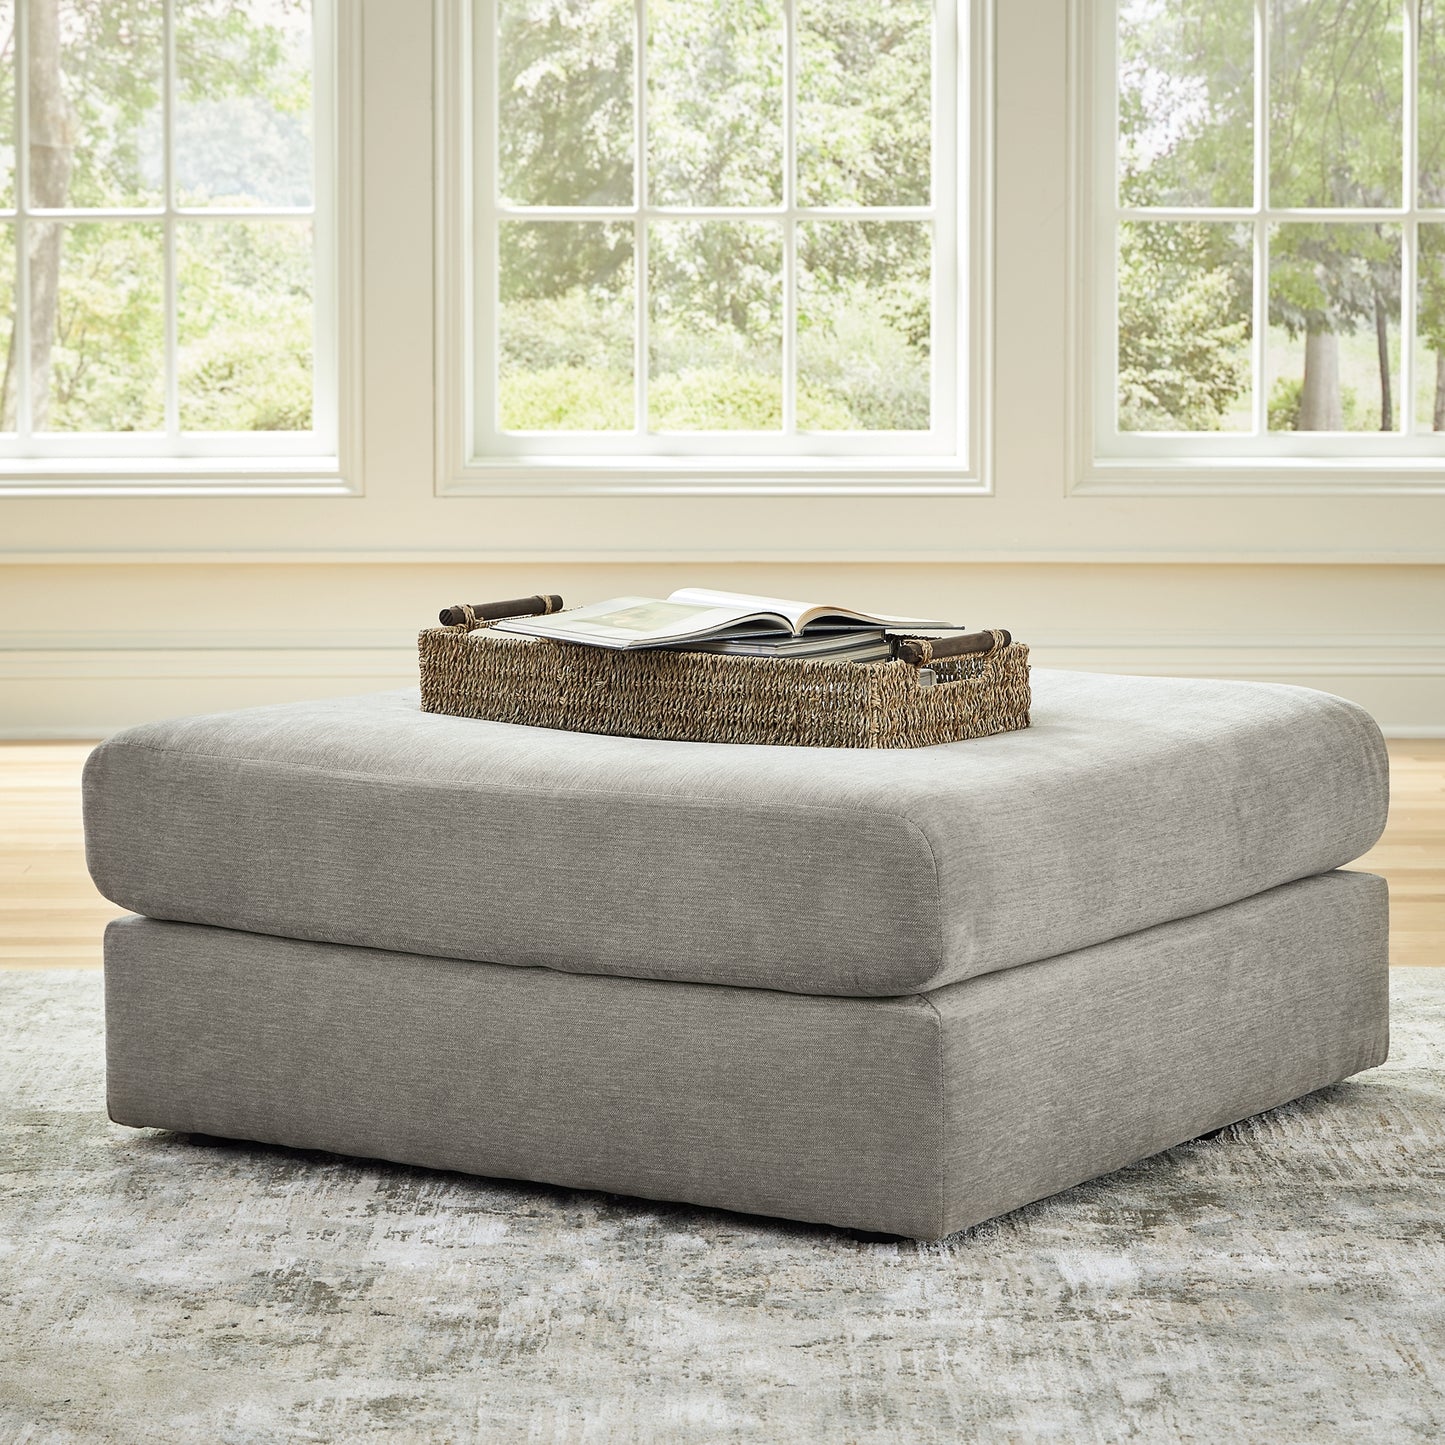 Avaliyah 5-Piece Sectional with Ottoman